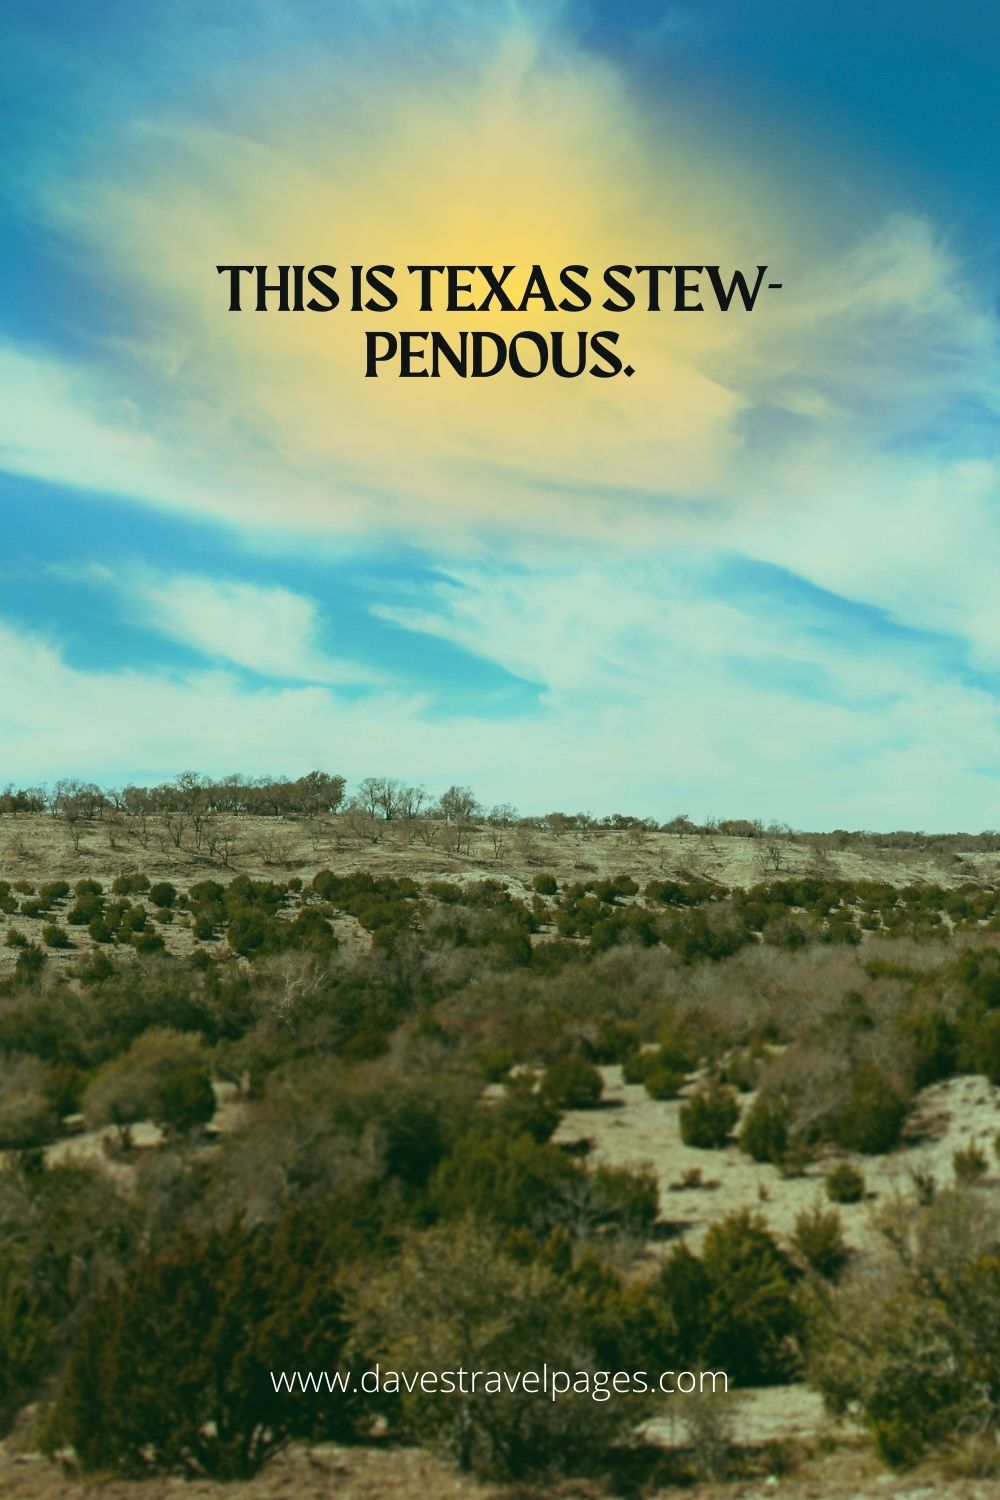 This is Texas stew-pendous.